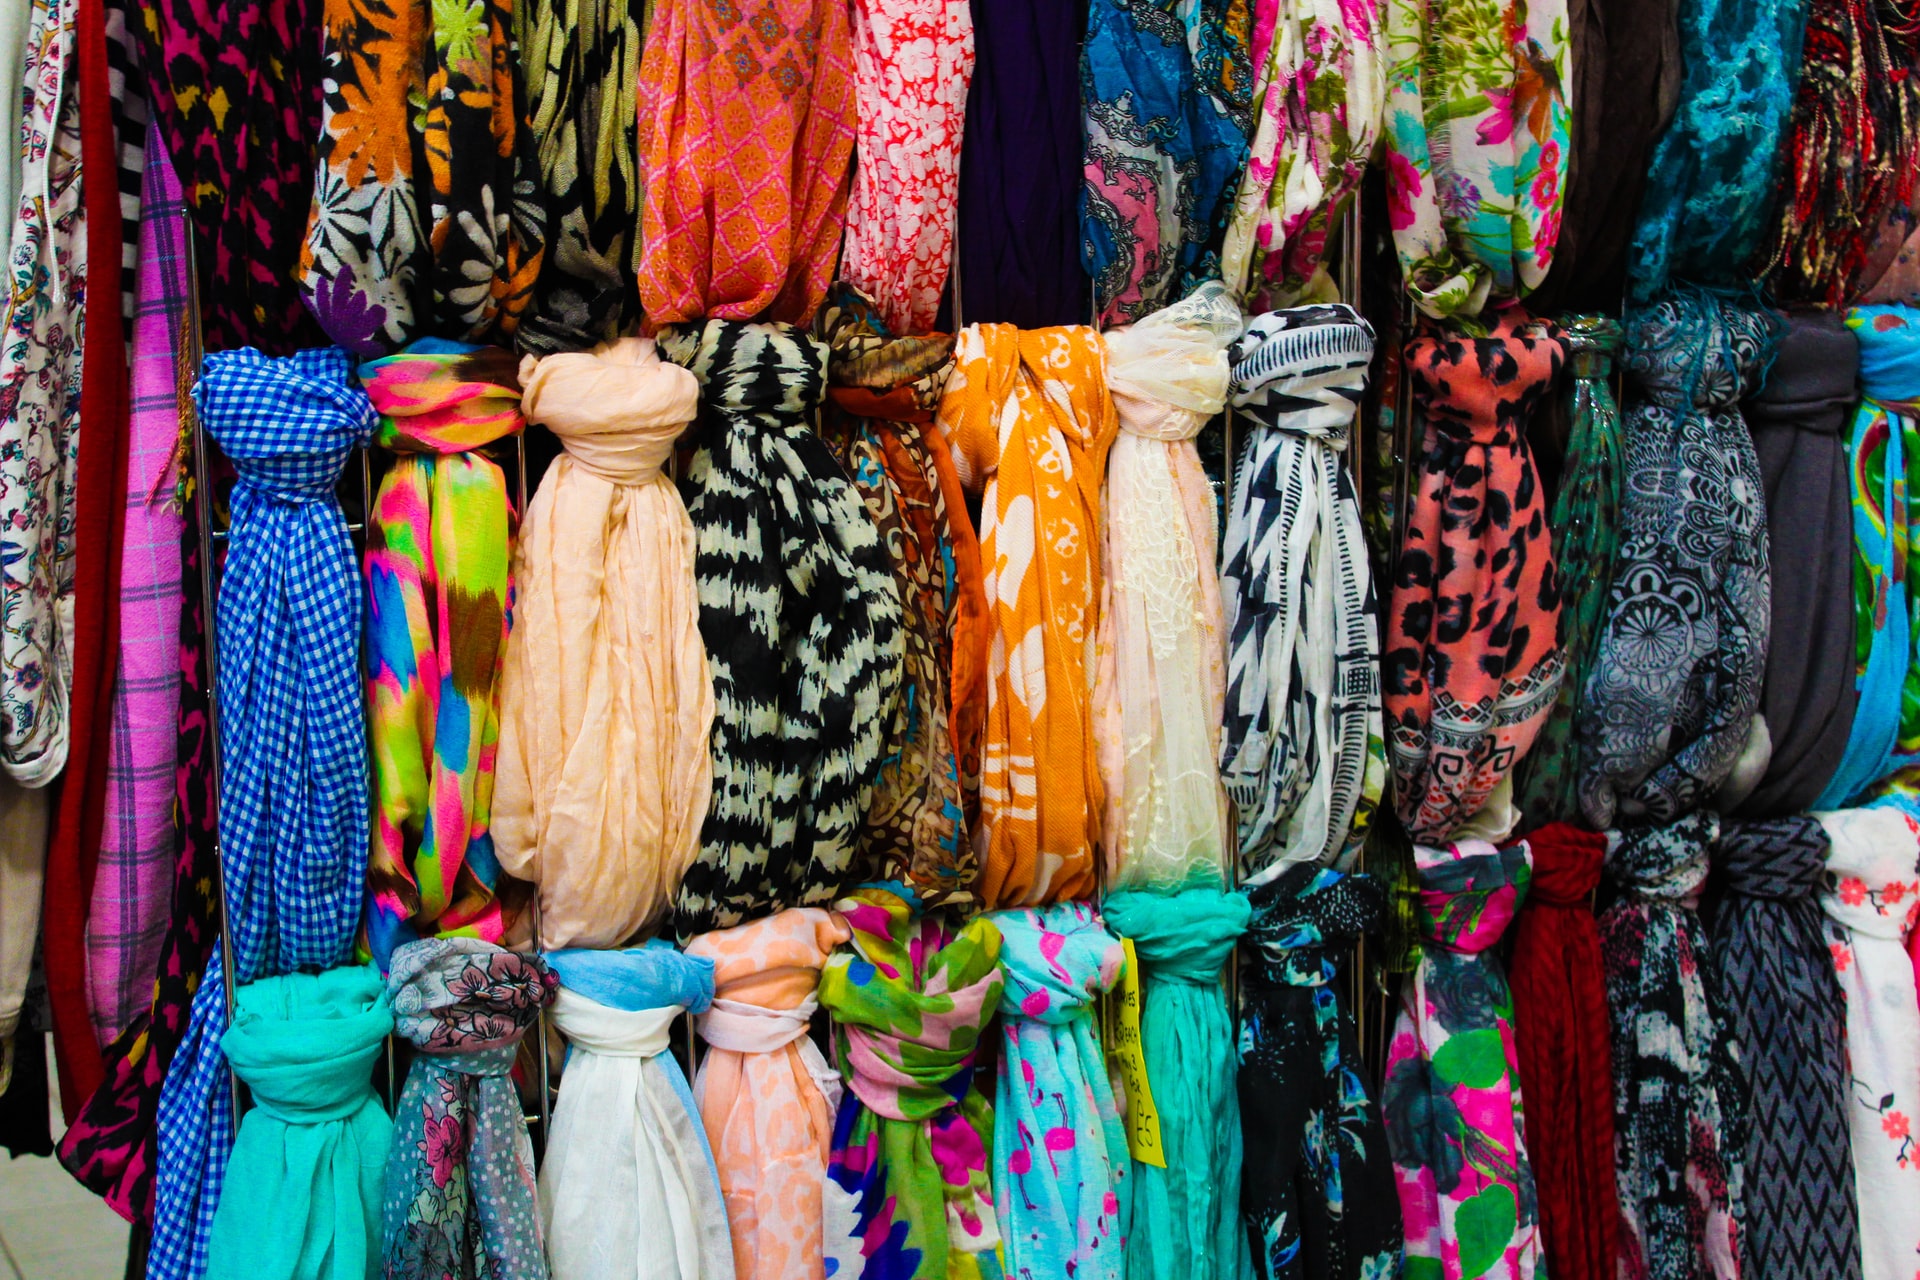 A display of a variety of multi-coloured scarves, tied in a knot across three bars and hanging down.